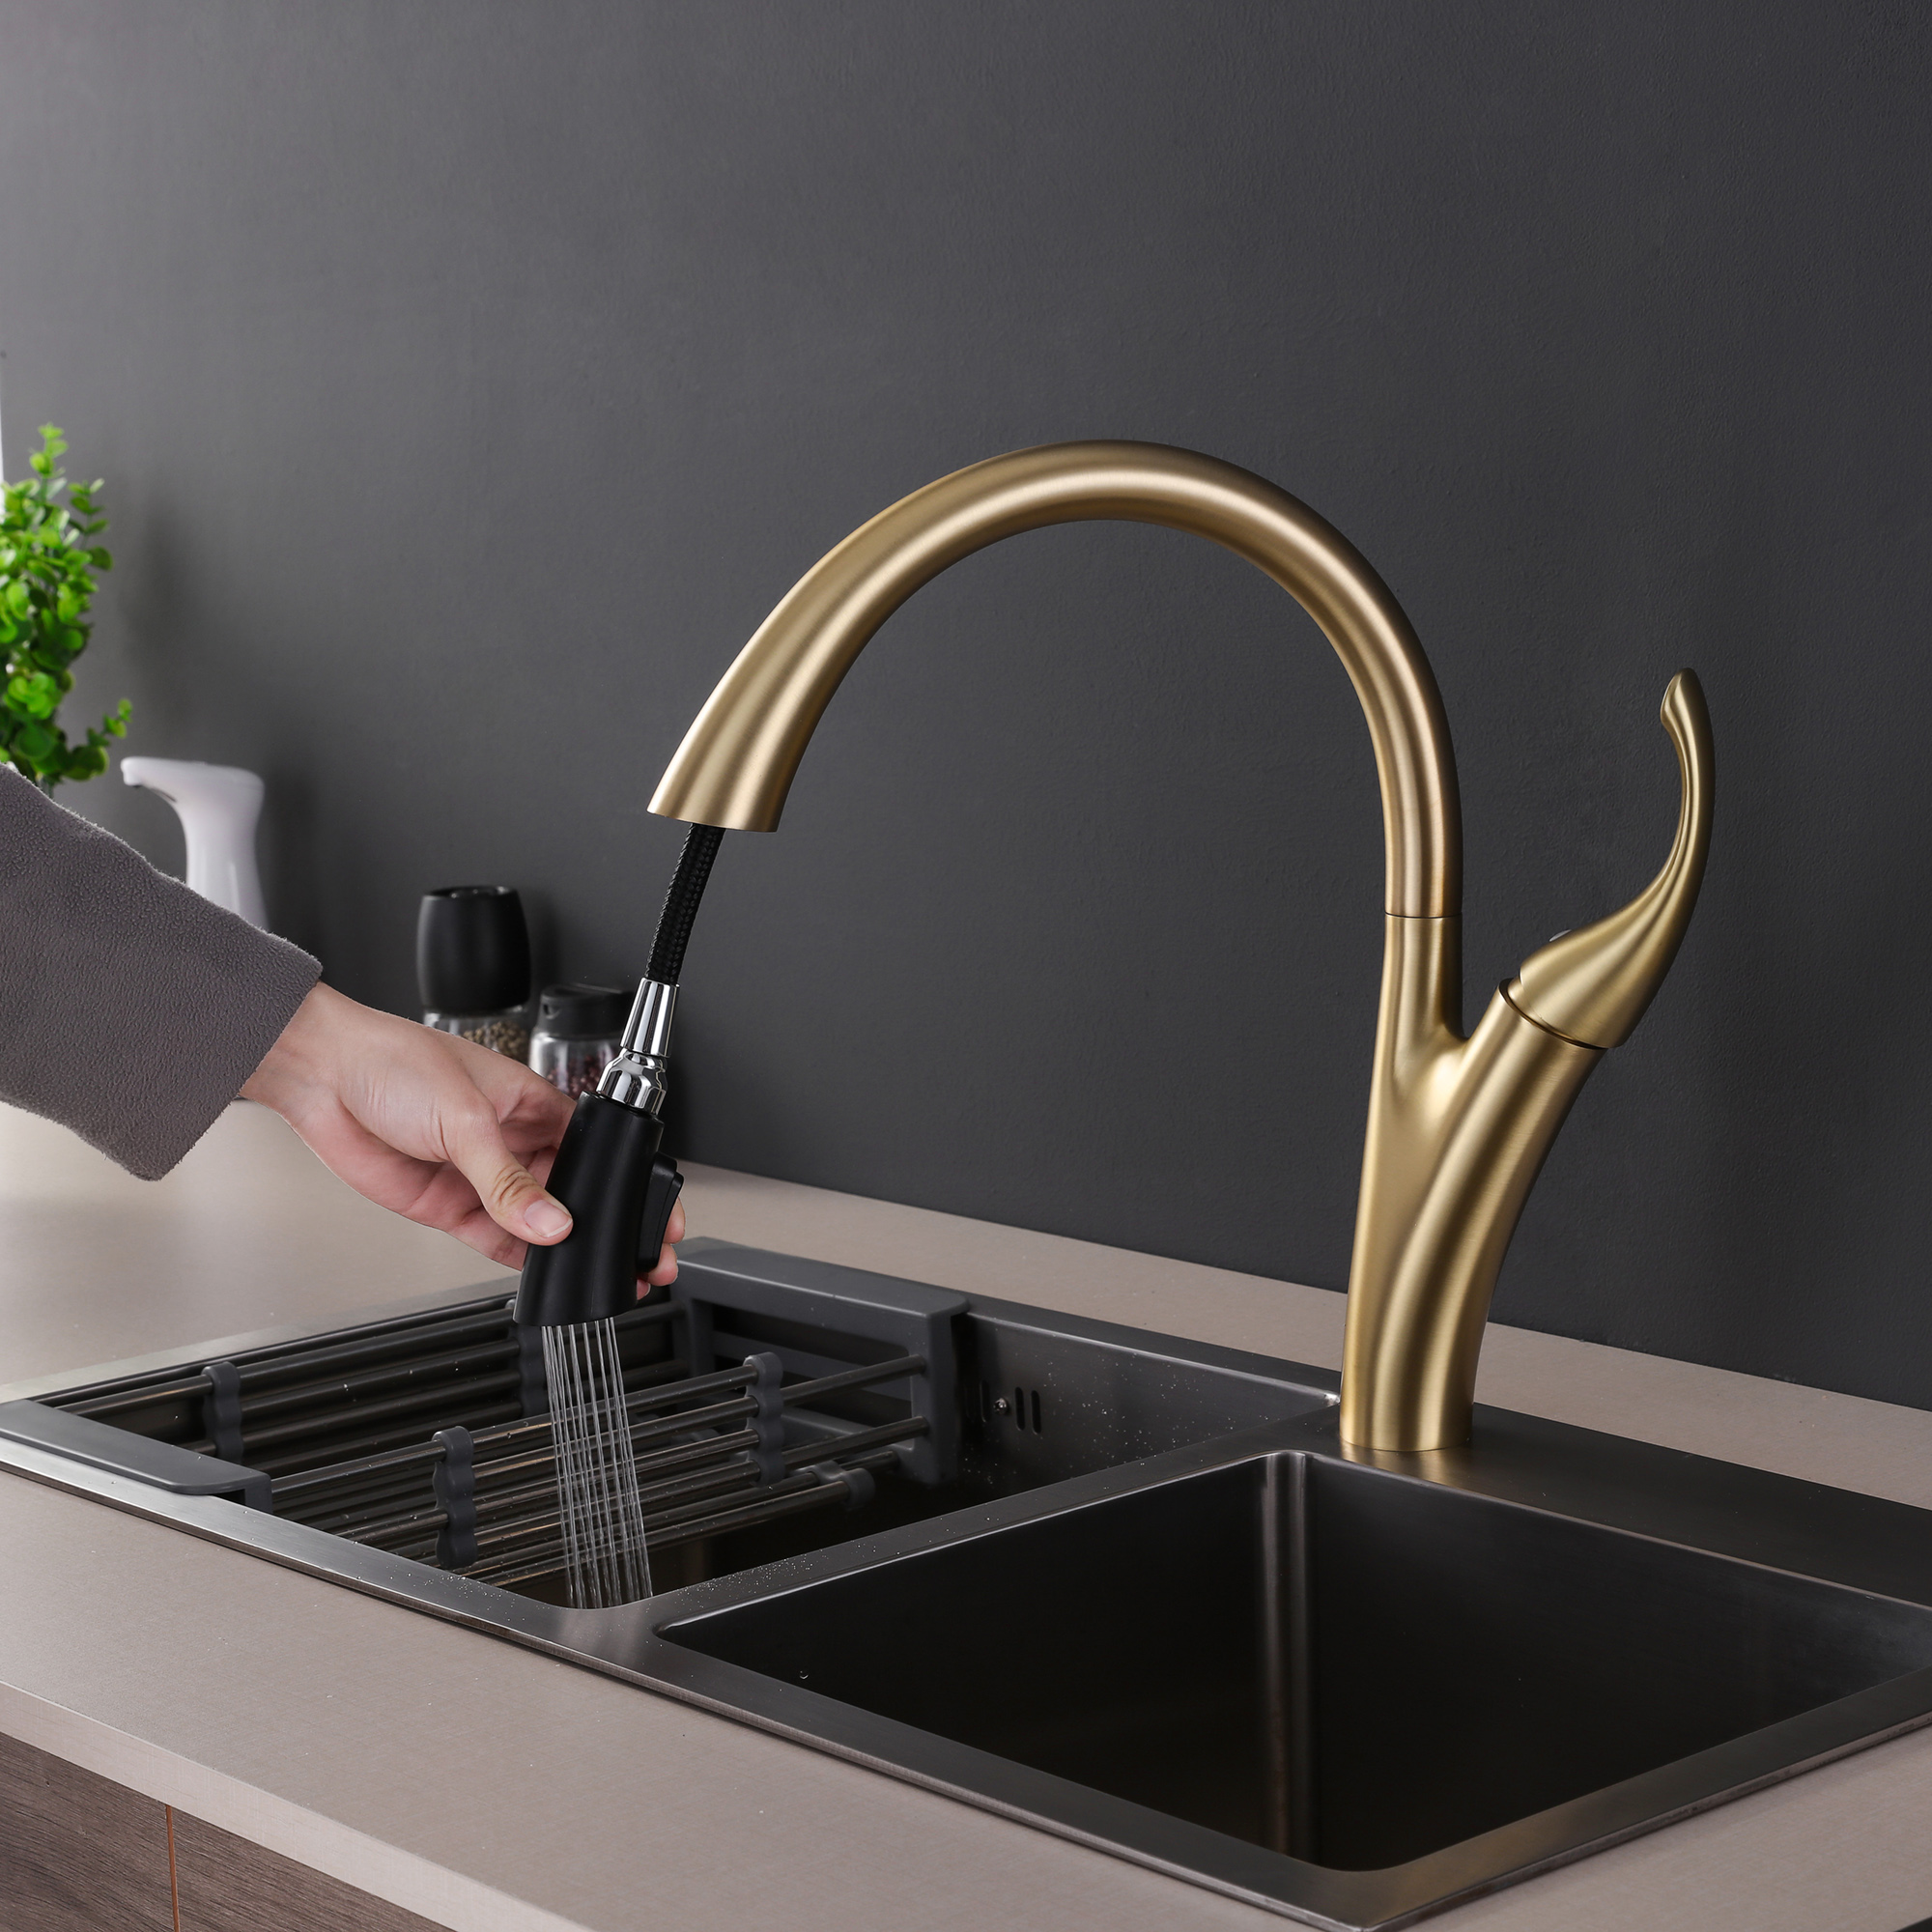 Gowo Copper Normal Tap Faucet Cupc Certif Kitchen Mixer With High Quality